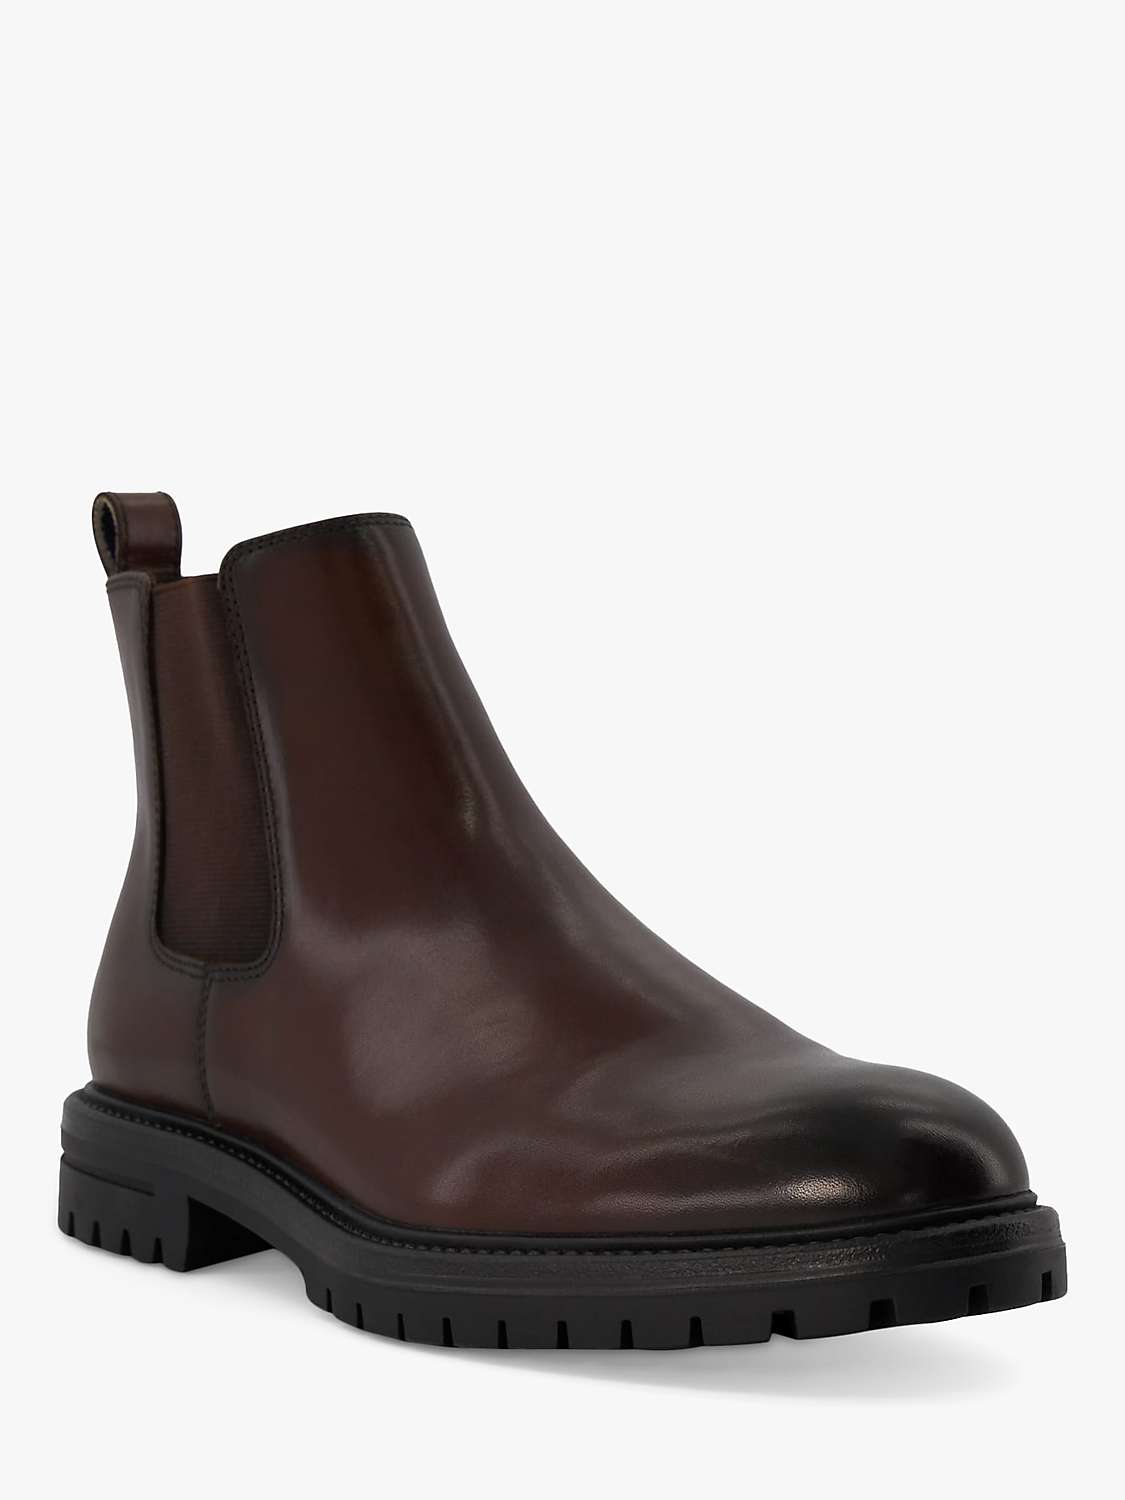 Buy Dune Created Leather Chelsea Boots, Black Online at johnlewis.com